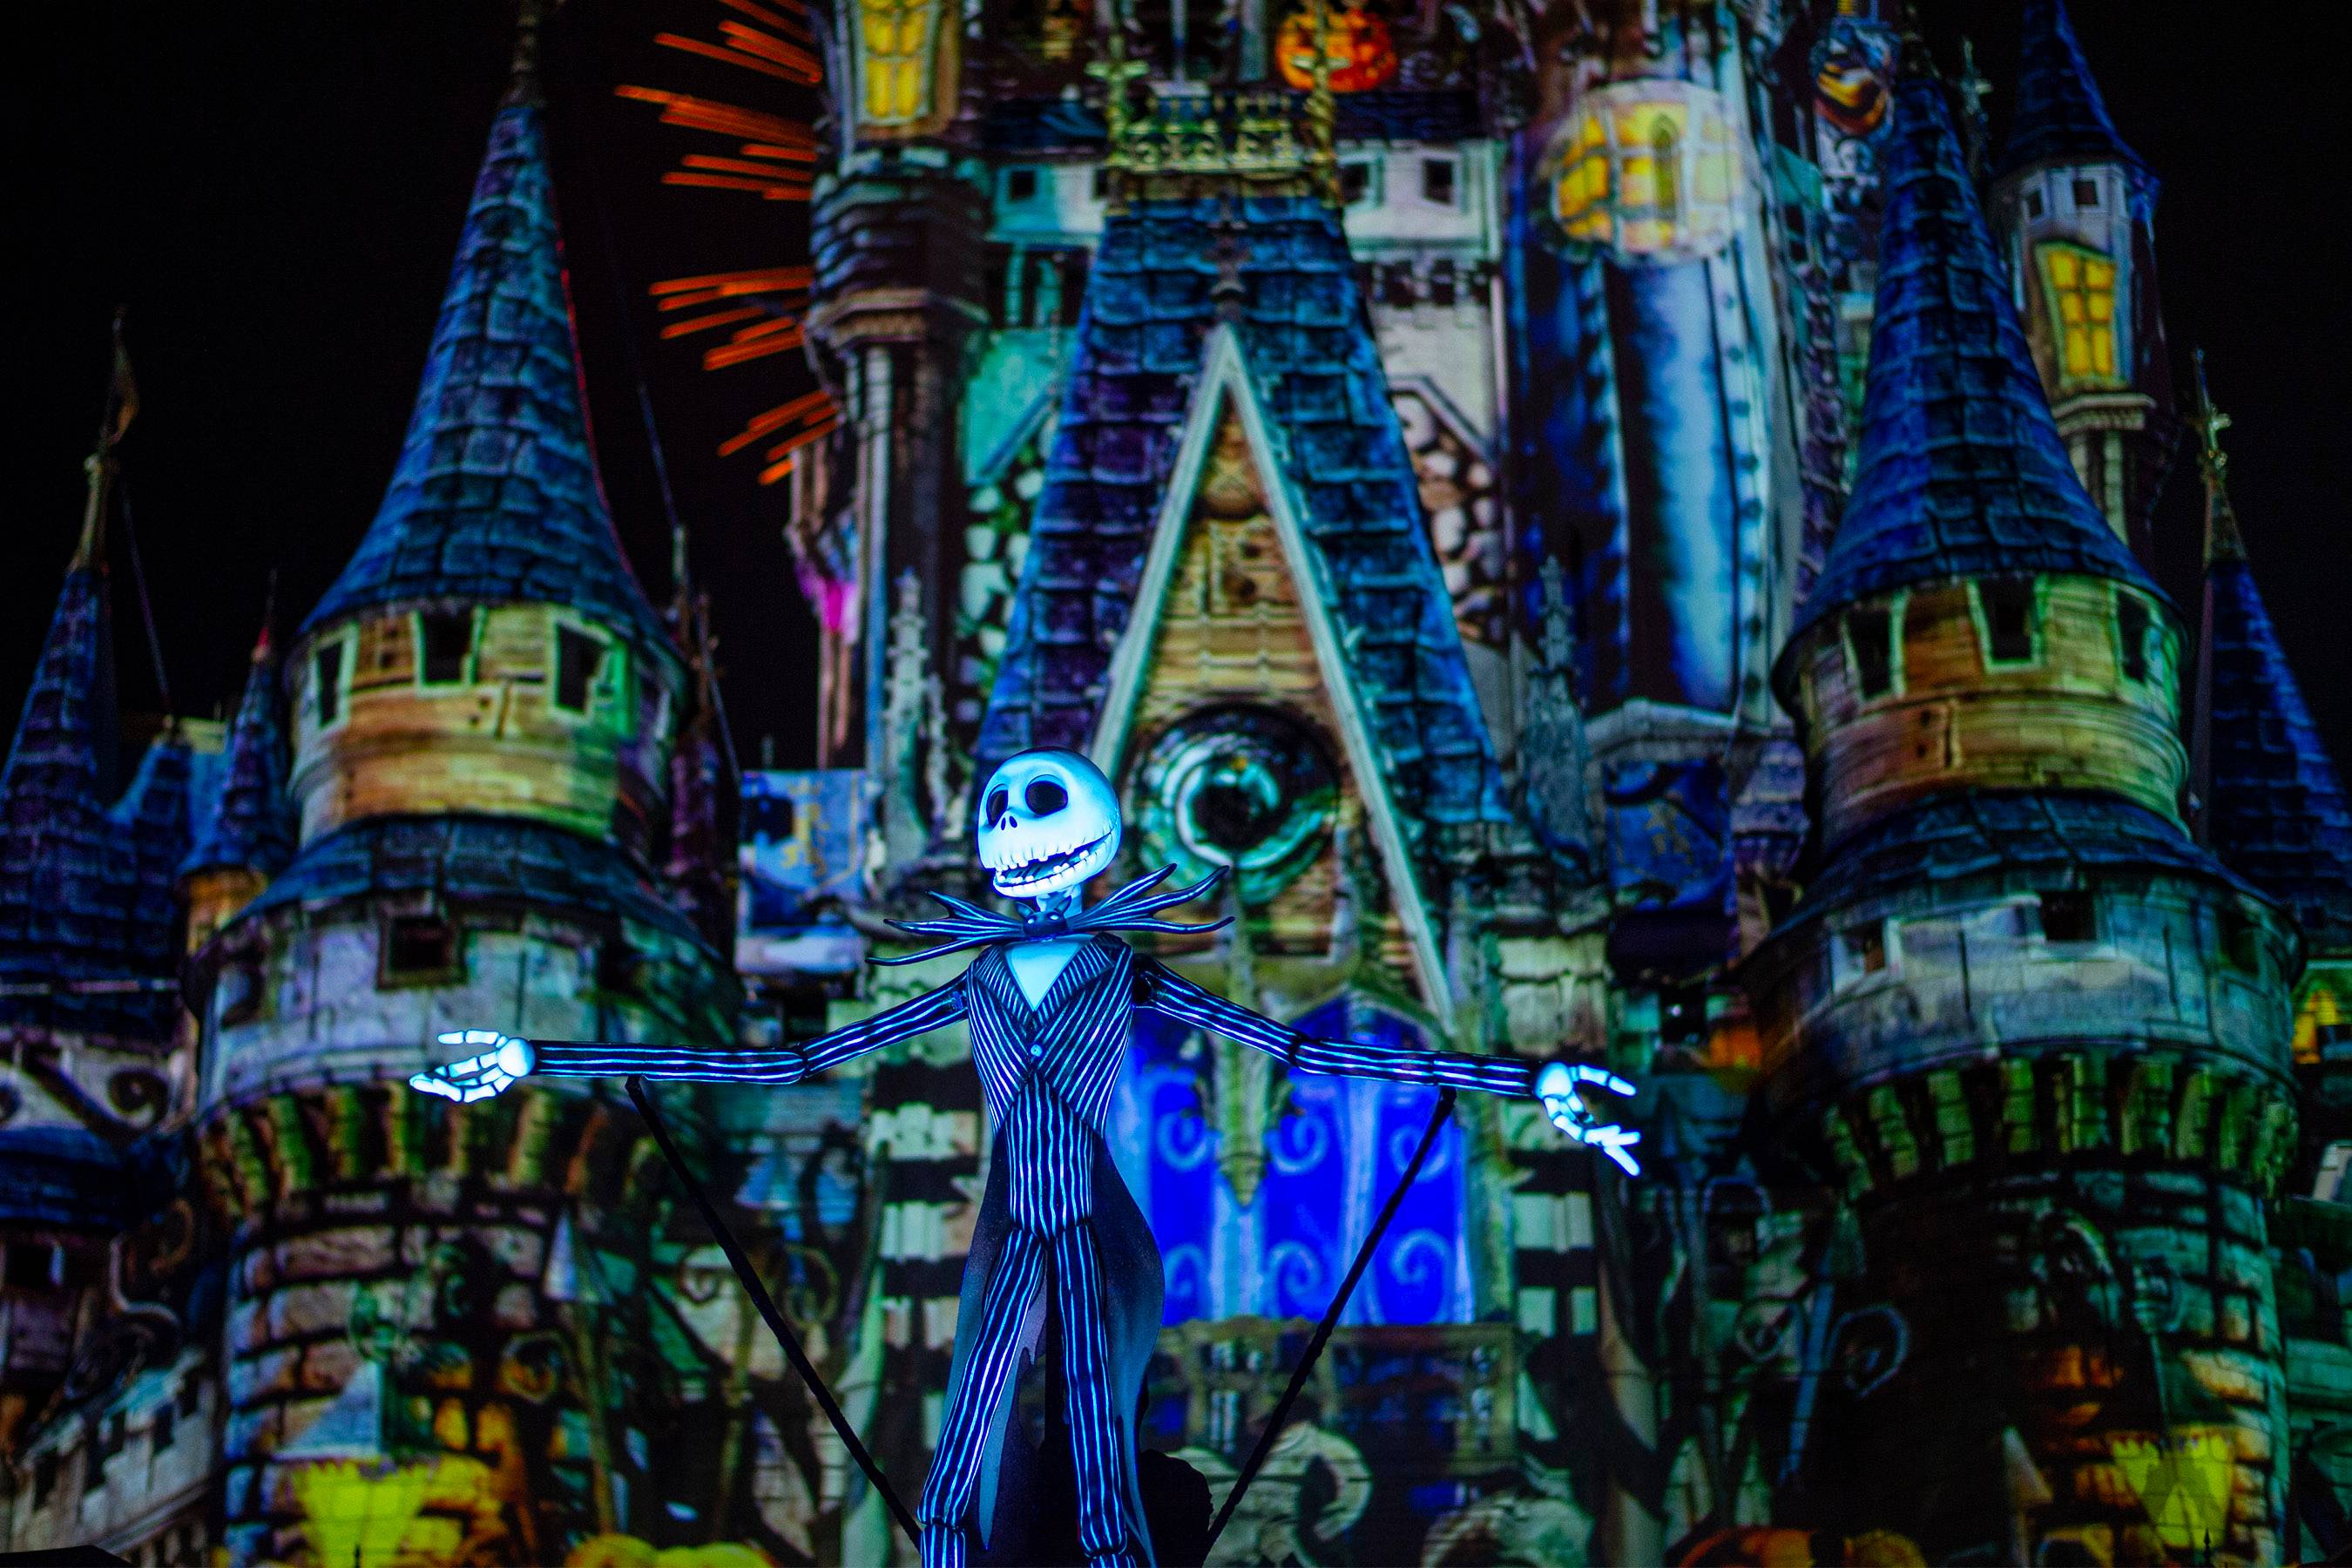 VIDEO - Disney's Not So Spooky Spectacular debuts at Mickey's Not-So-Scary Halloween Party